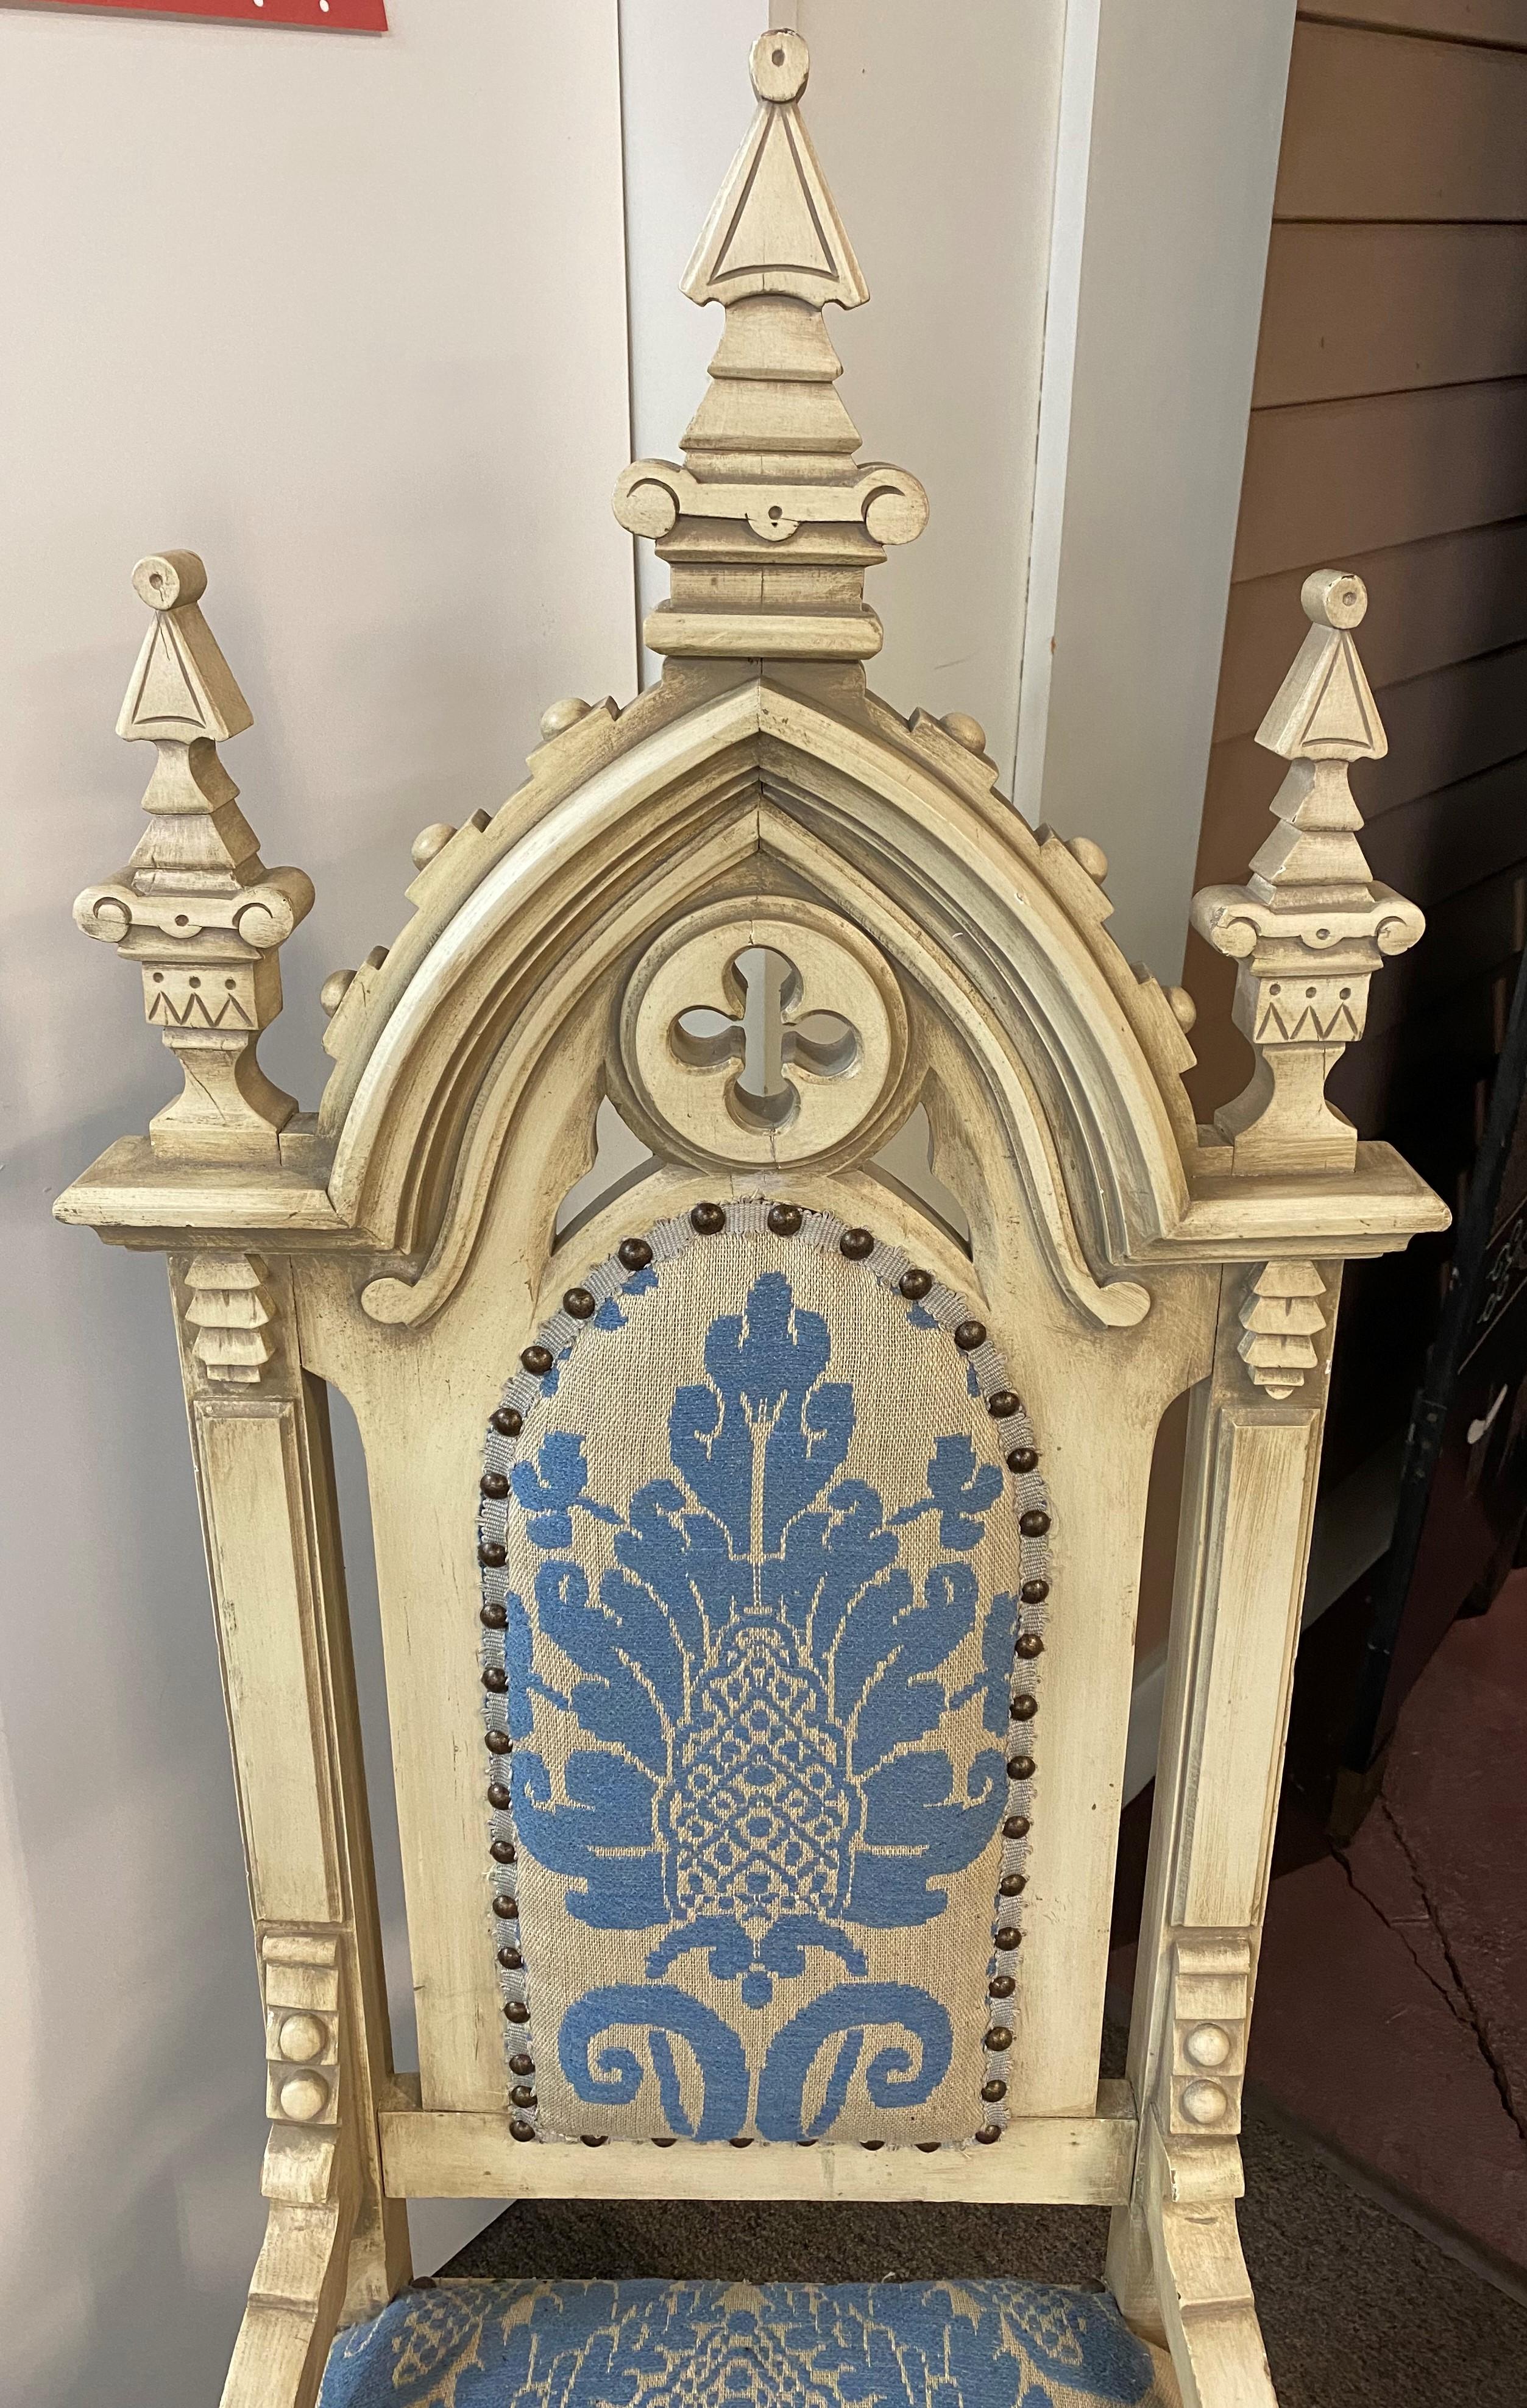 A fine assembled pair of Gothic Revival side chairs, painted in white and upholstered in blue & white. The backs, legs, and crests are ornately carved, one slightly larger than the other, perhaps the man’s chair. The set dates to late 19th or early